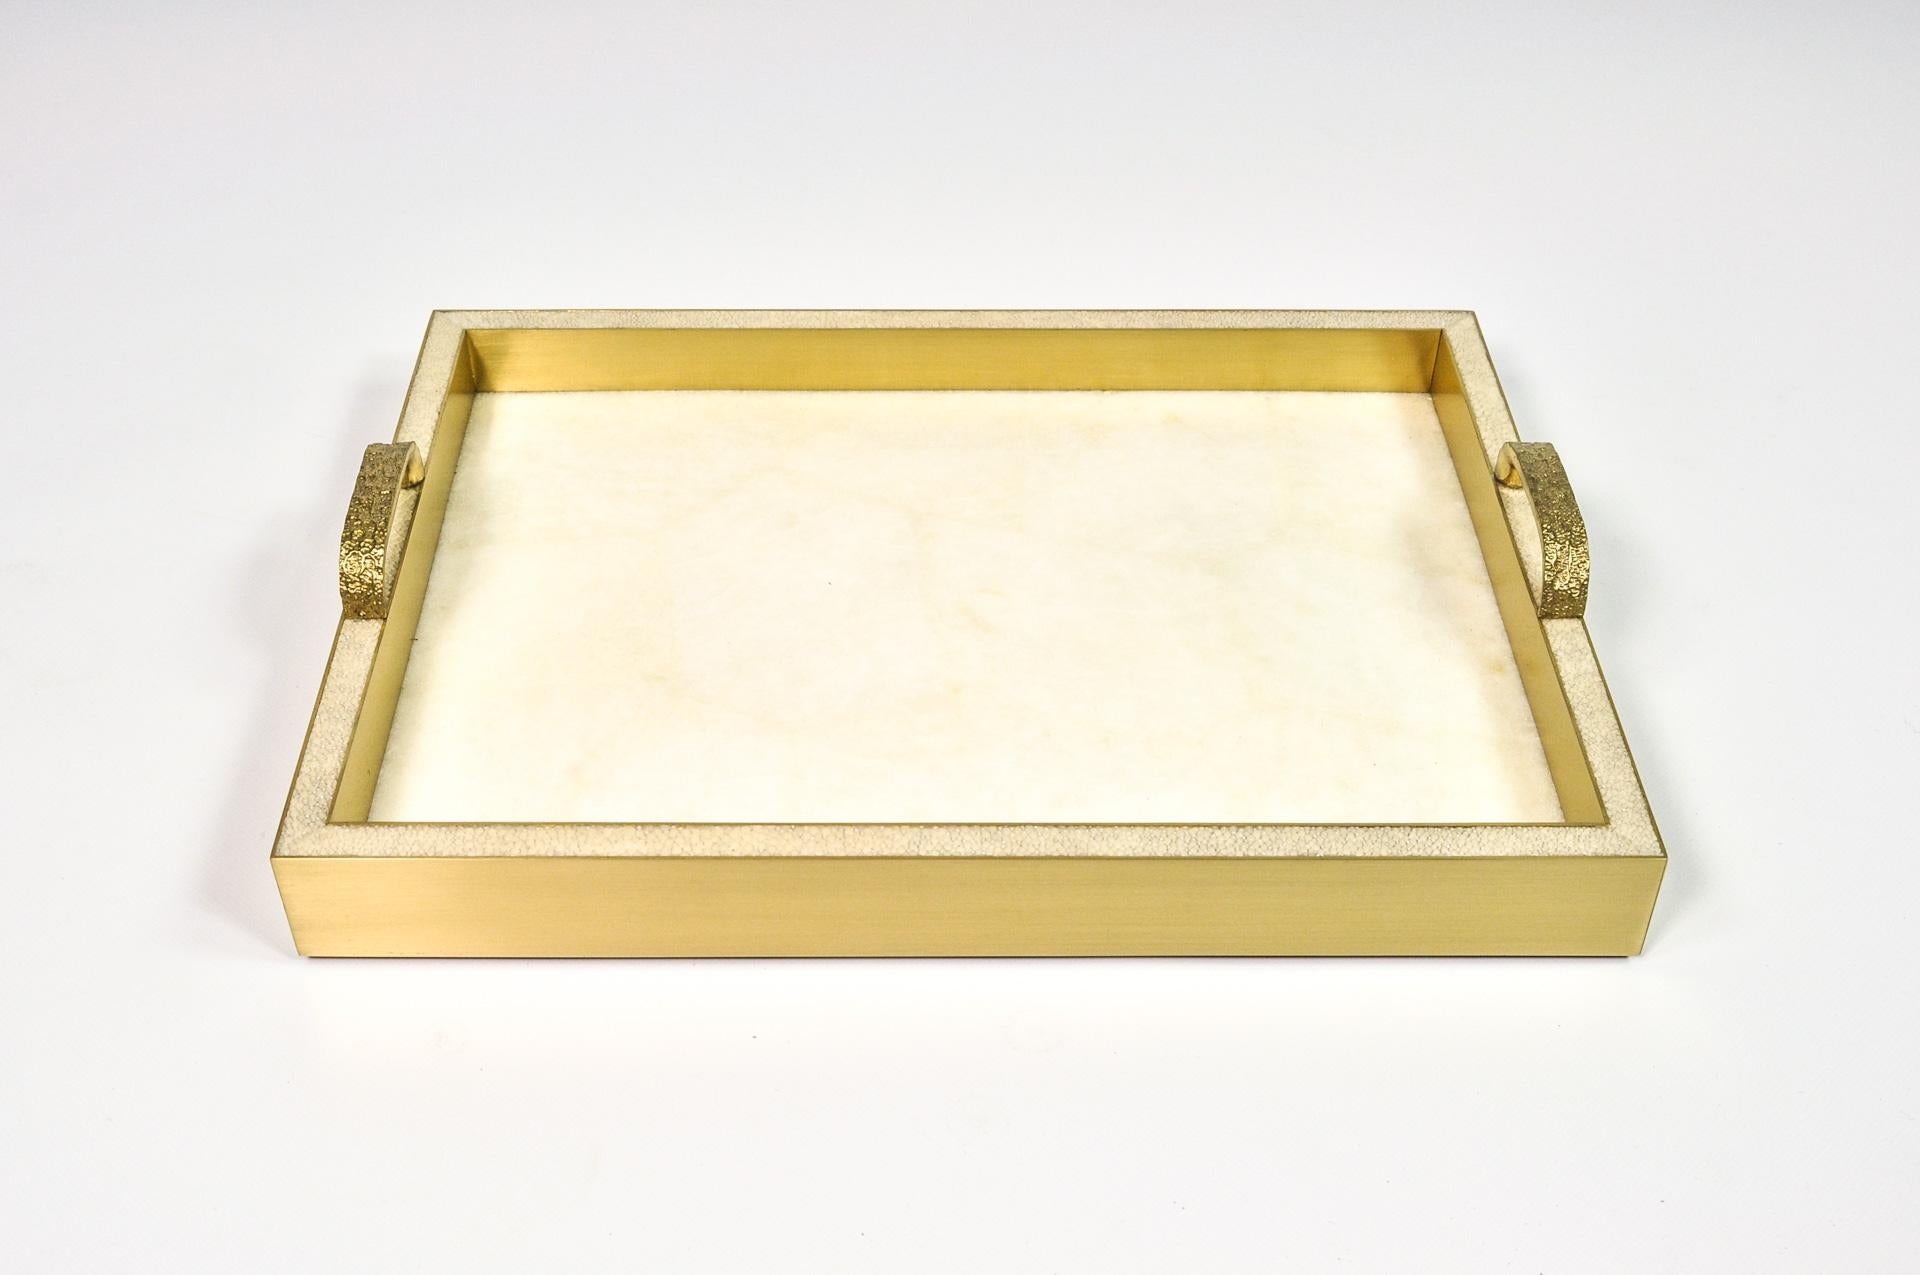 This table tray is made of white rock crystal marquetry with brushed brass sides (interior and exterior).
The upper edge is made of shagreen.
The handles are in casted brass.

Dimensions: 15.75 